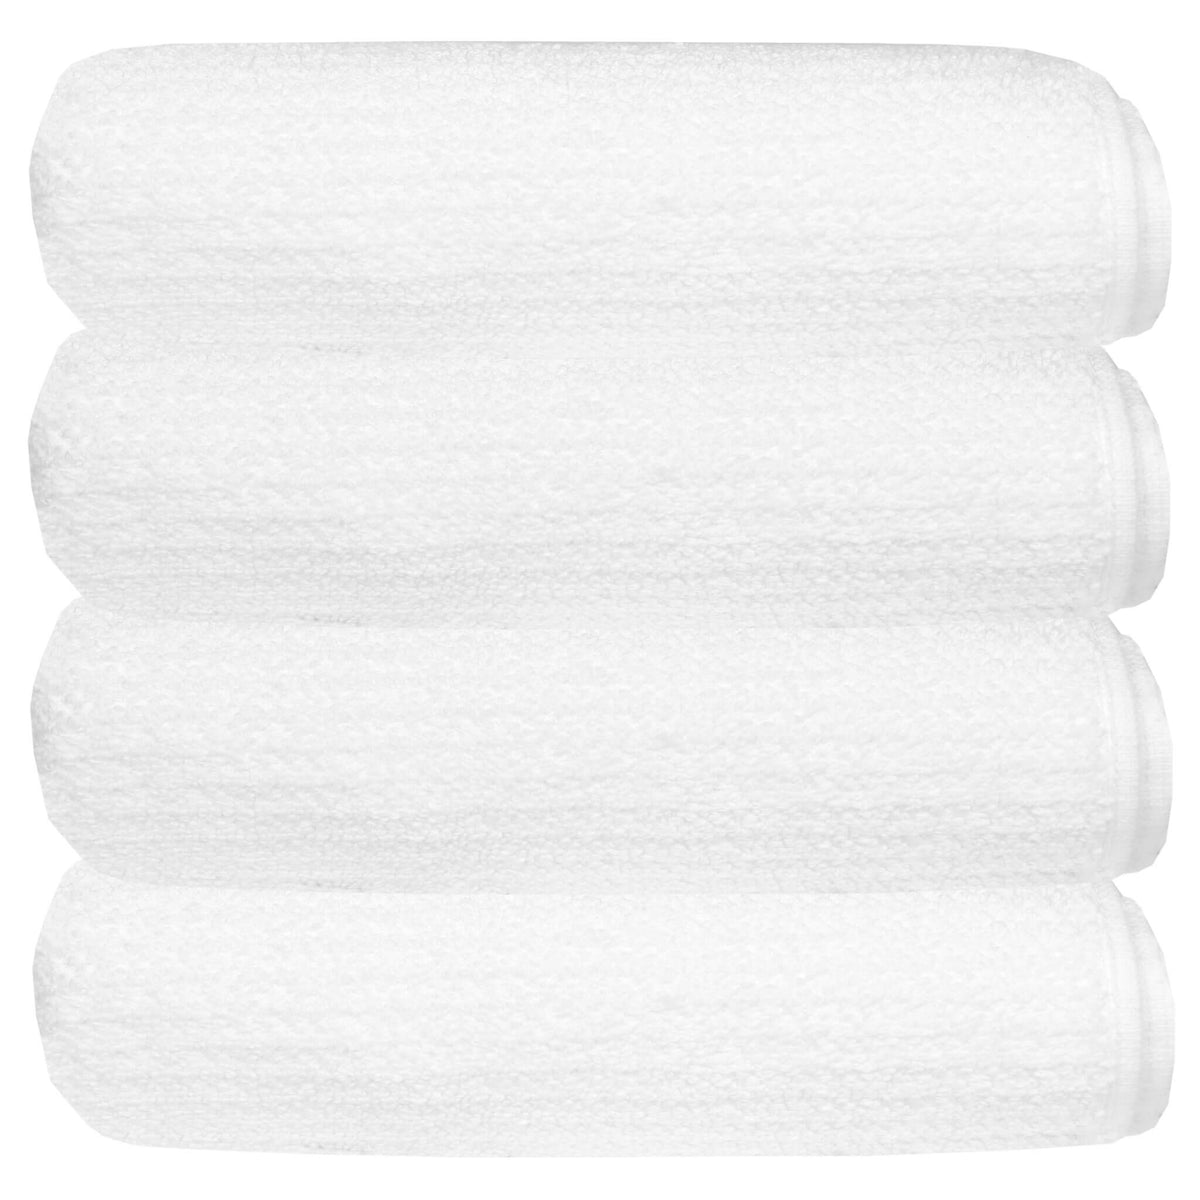 Five Star Hand Towels, Wholesale